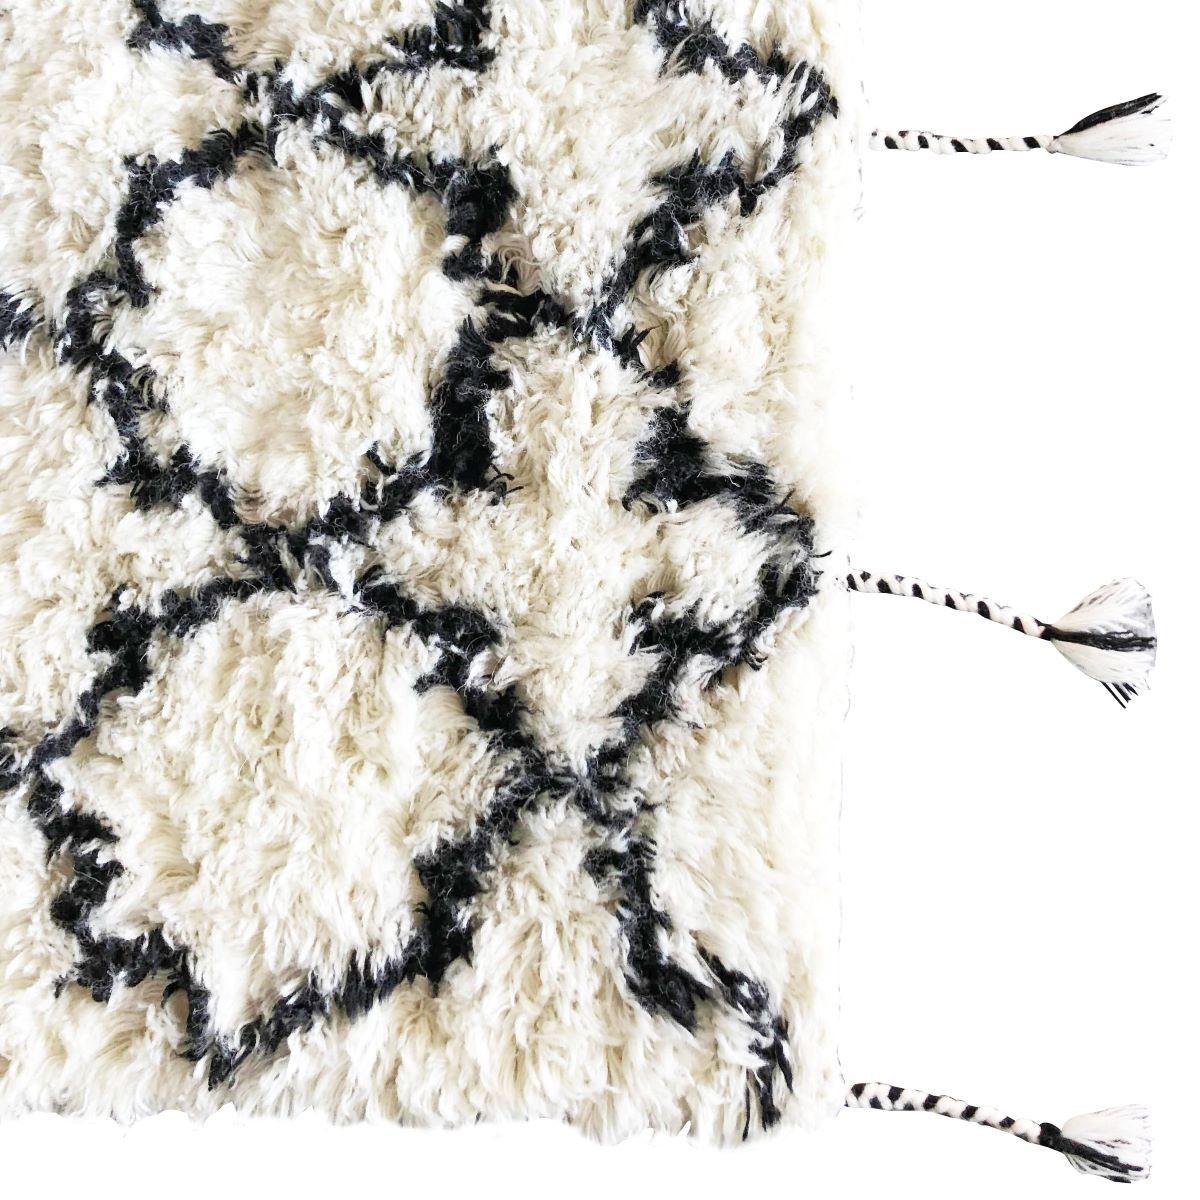 Brahma Wool Rug - Rug - cheap white rug | rugs for sale melbourne | large rugs for sale near me | large rugs melbourne | large round rugs cheap | black bedroom rug | floor carpets for sale | carpets and rugs online | discount rug stores near me | area carpets near me | area mat | Upcycle Studio